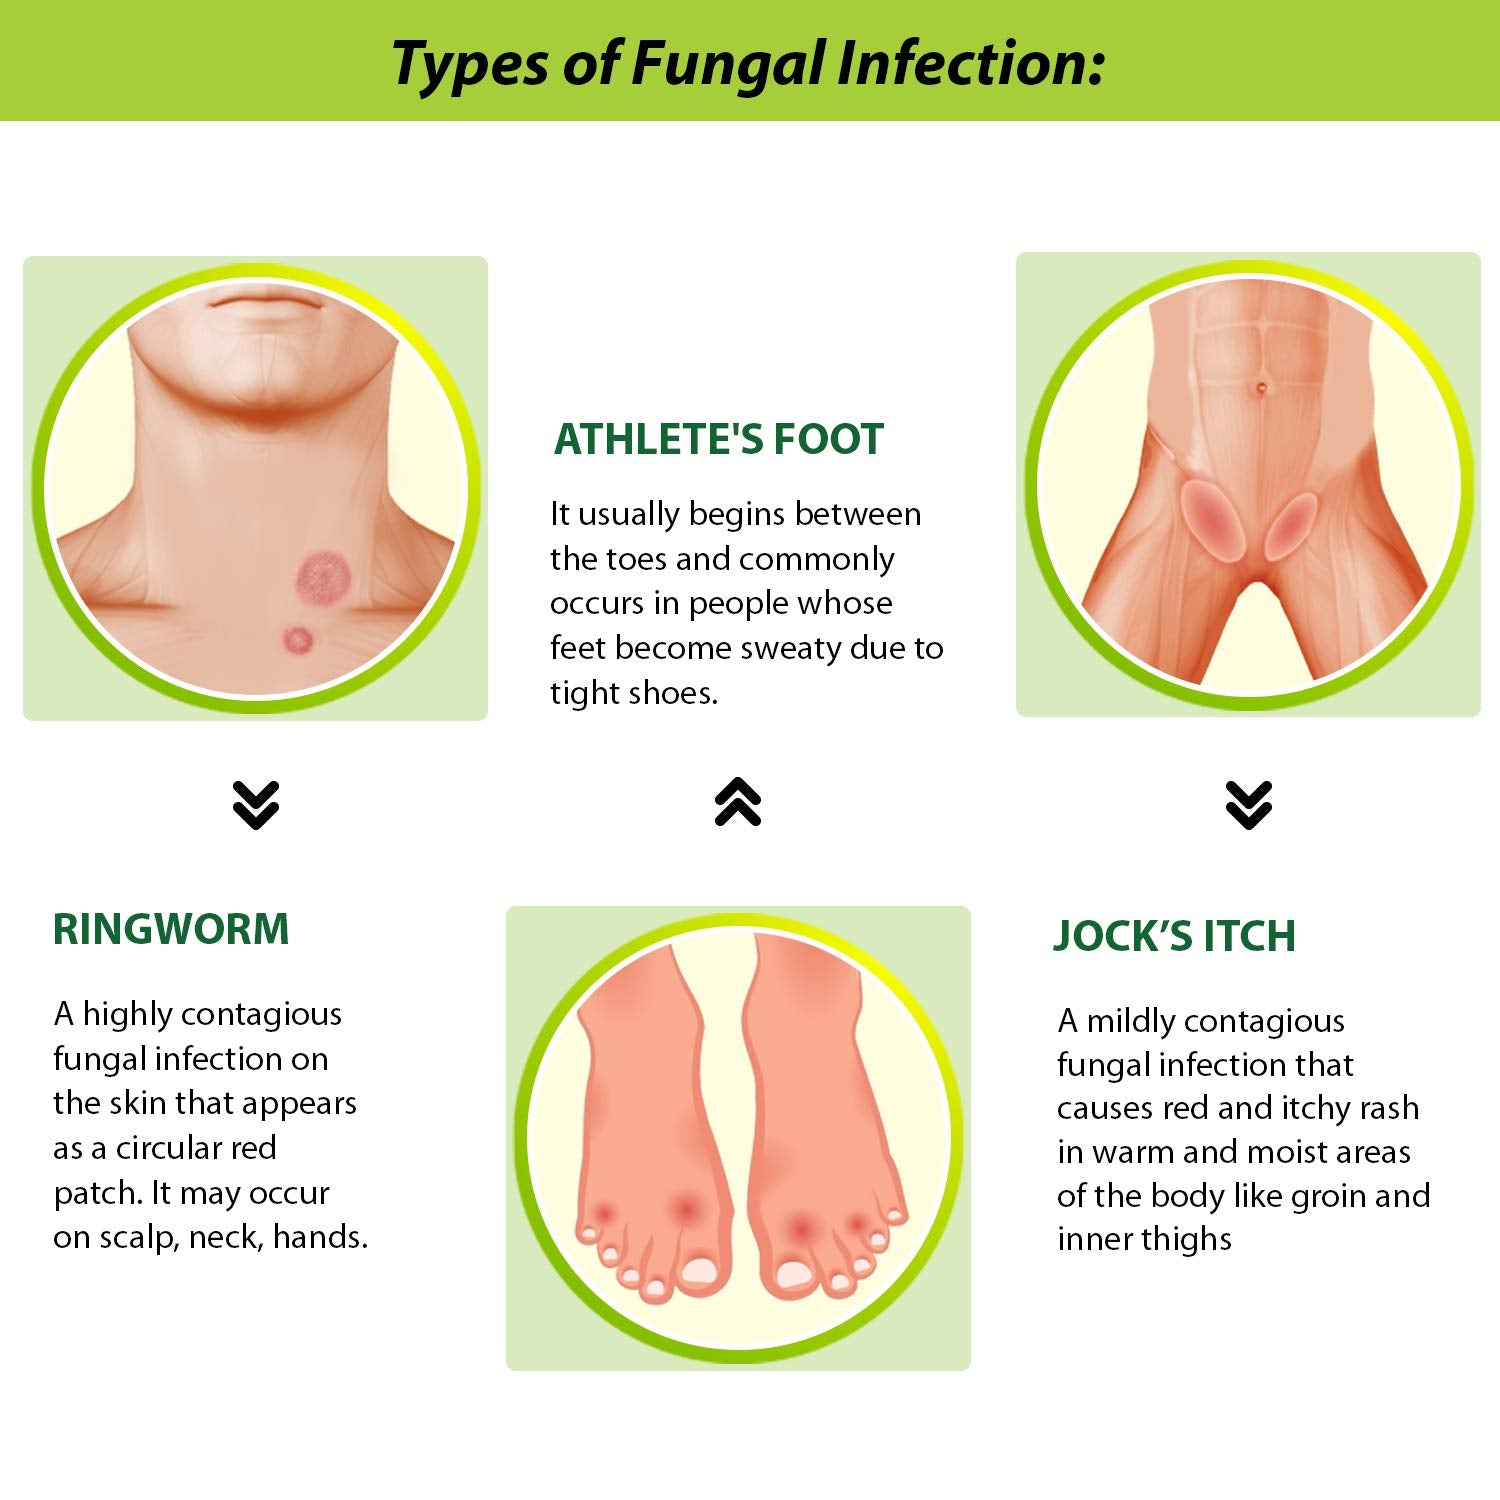 Fungal infection infographic